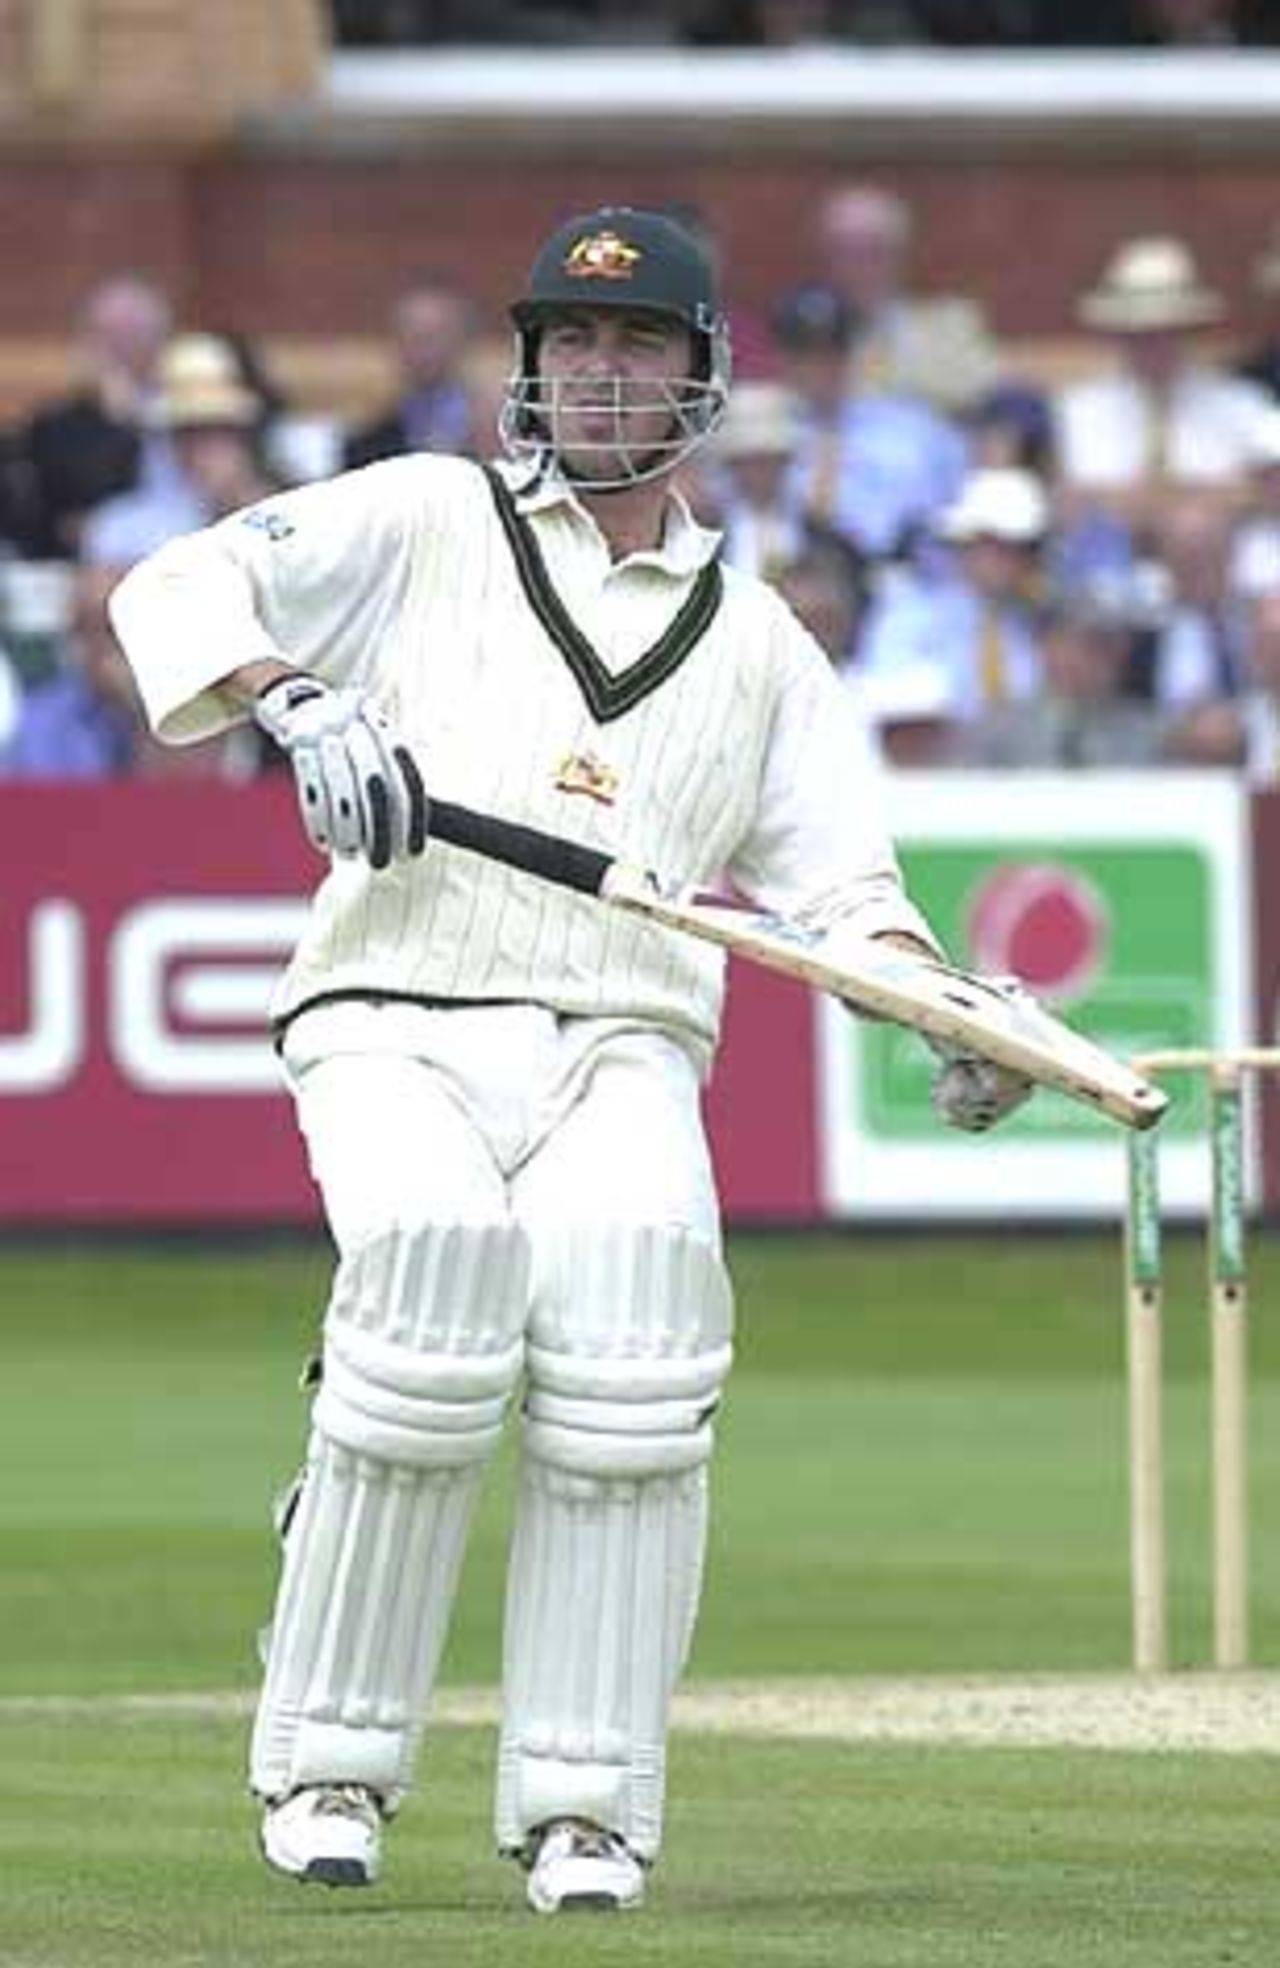 Damien Martyn on his way to a half century at Lords, England v Australia, The Ashes 2nd npower Test, Lords, 19-23 July 2001